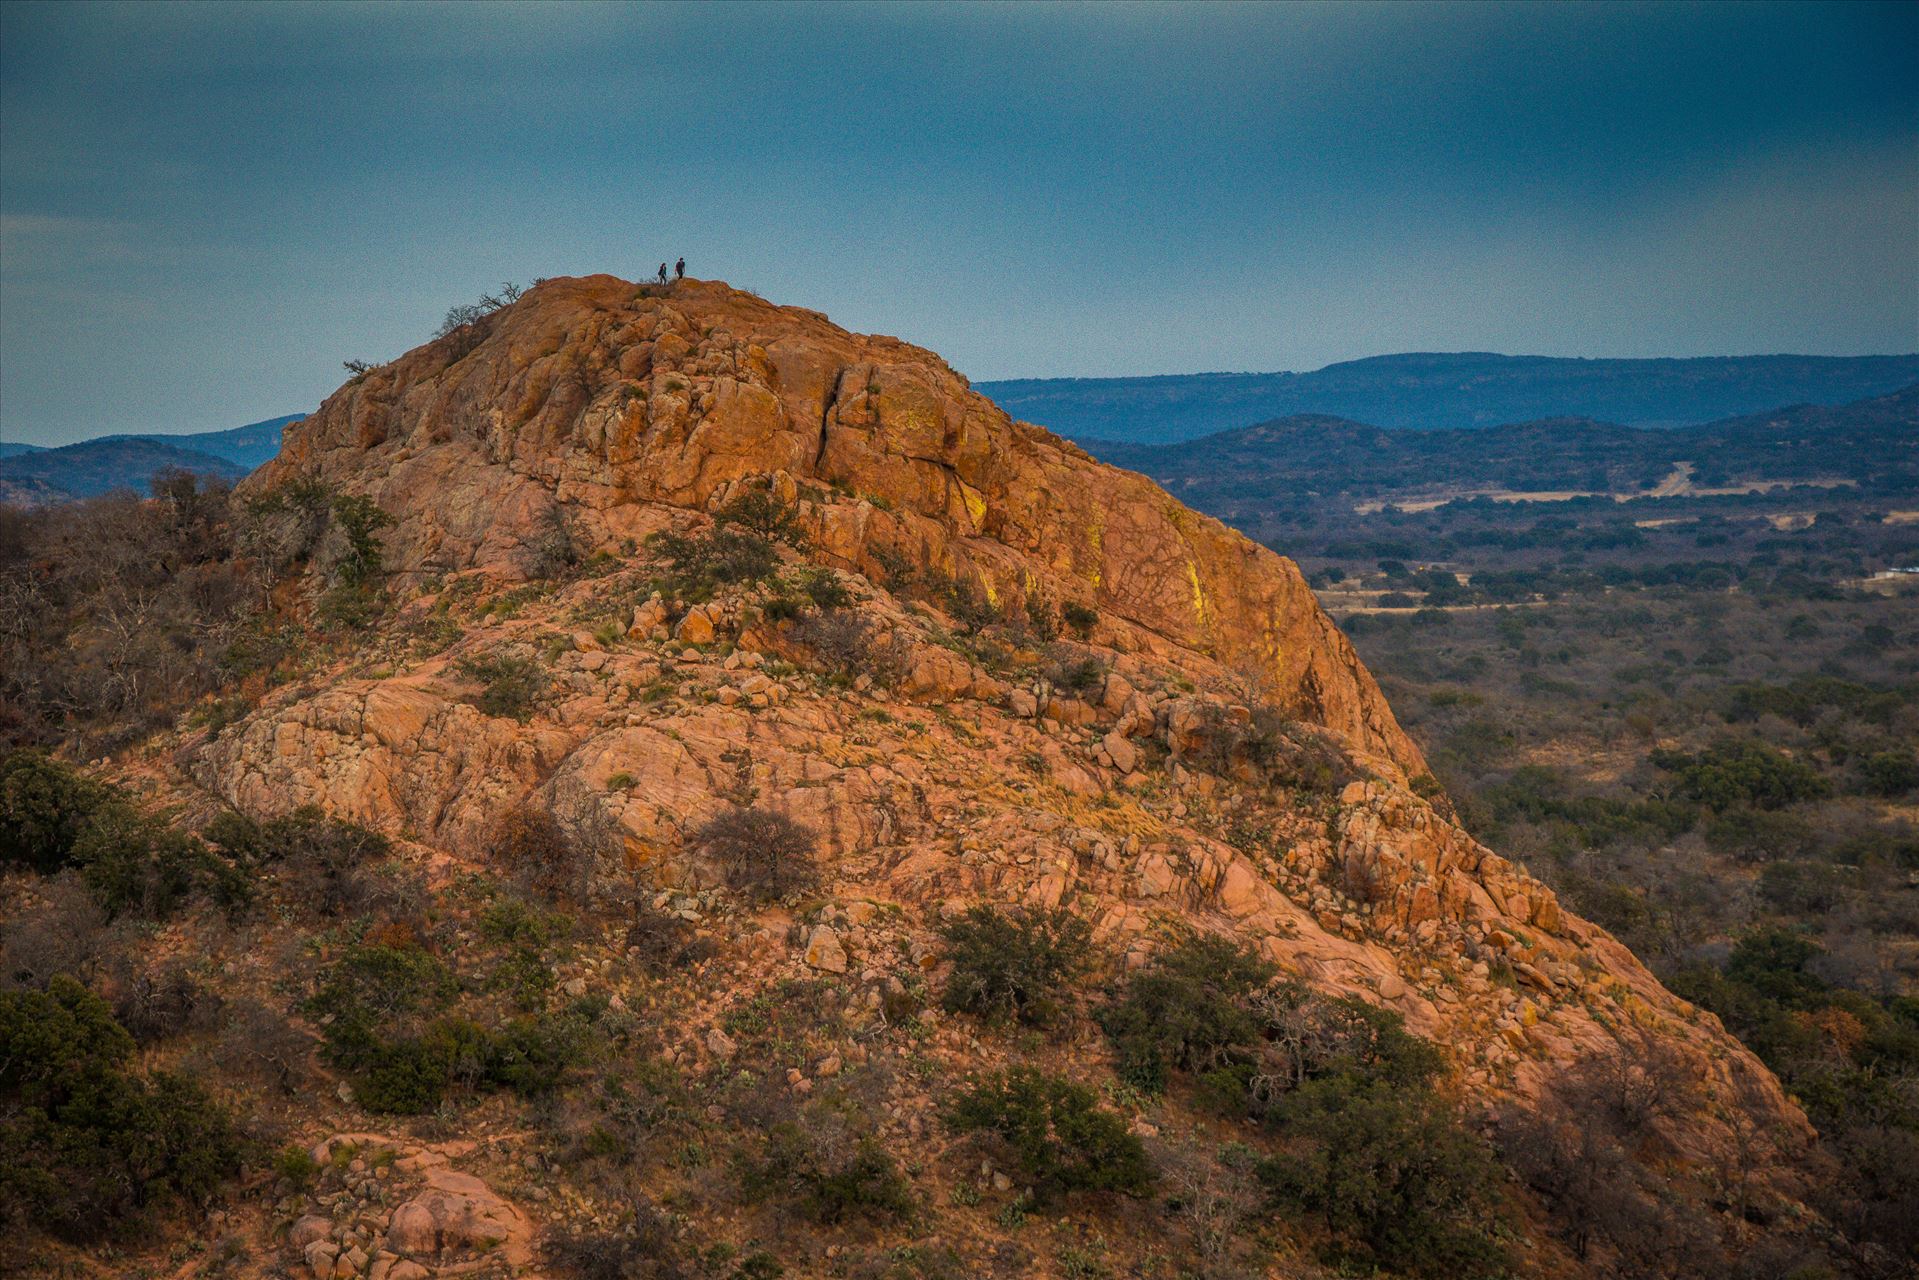 20140112-Enchanted Rock-DSLR-015.jpg  by Charles Smith Photography